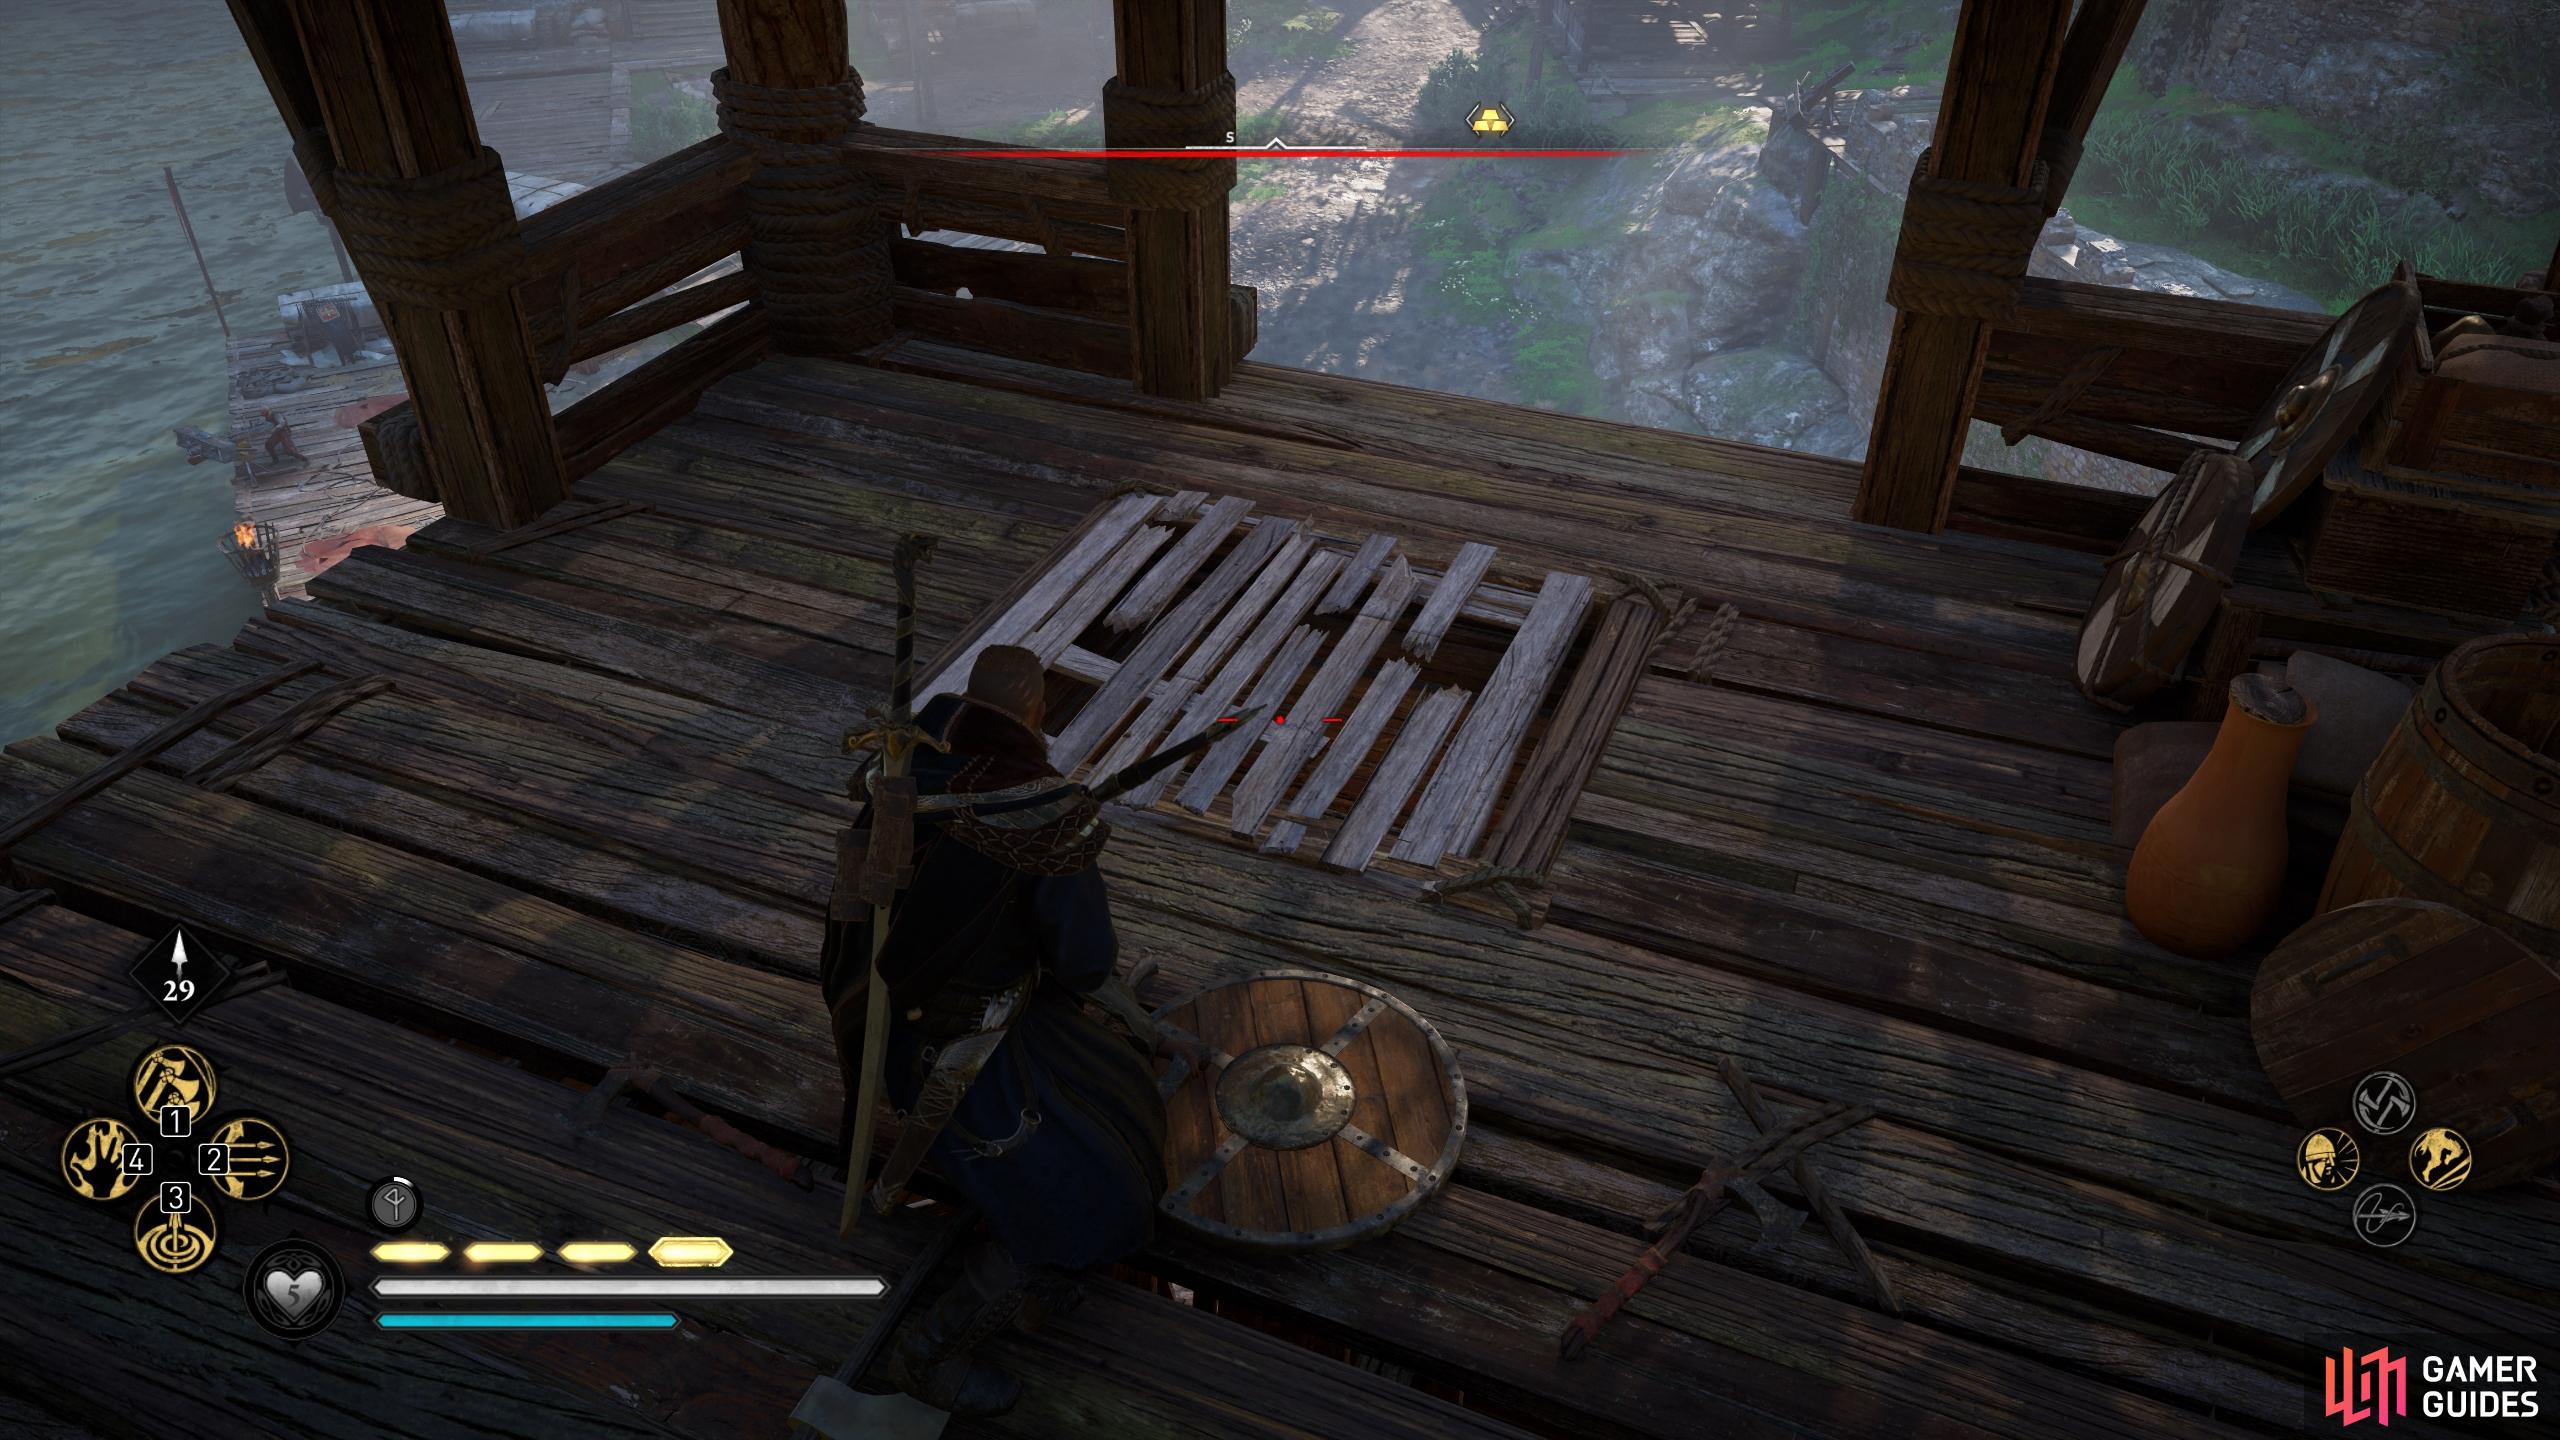 At the top of the tower, break the wooden floor to climb tot he bottom.